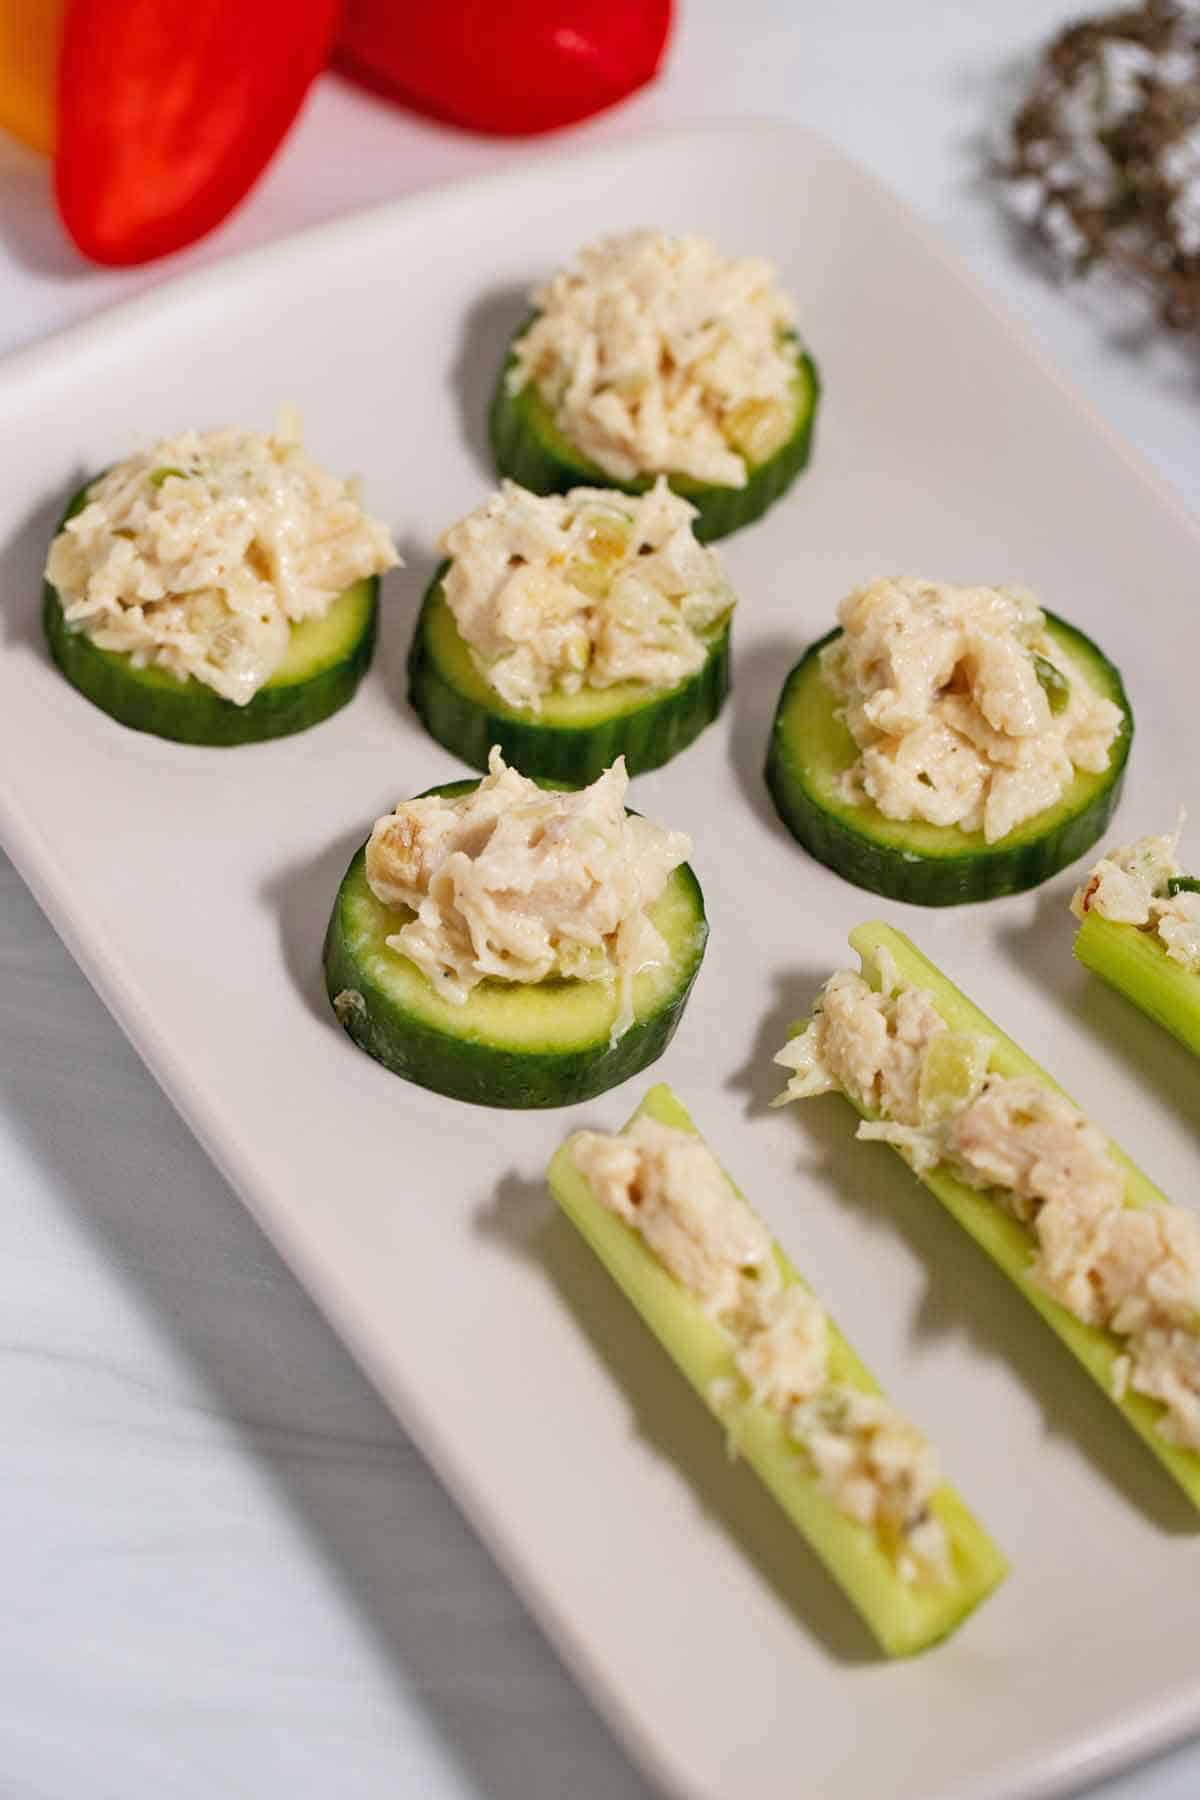 Plate of chicken salad veggie appetizers. Chicken salad is spread on cucumber slices and in the hollows of celery.